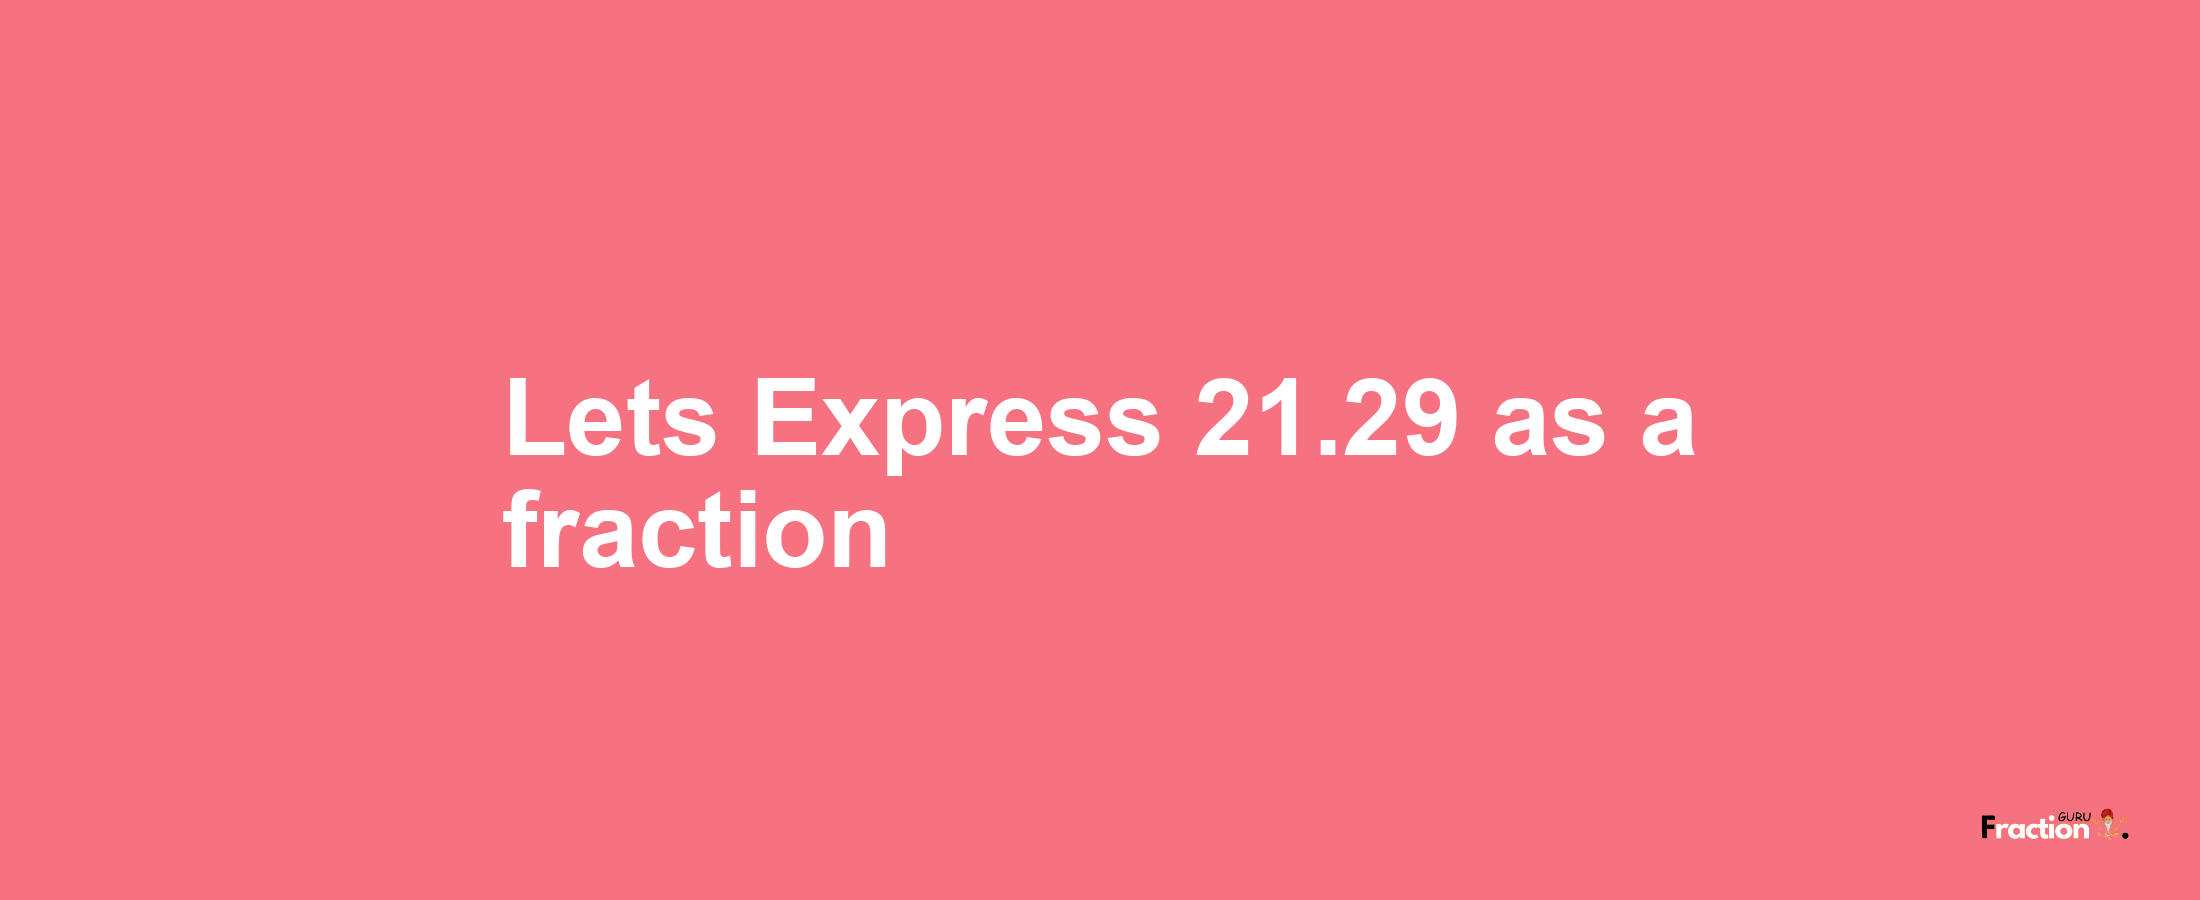 Lets Express 21.29 as afraction